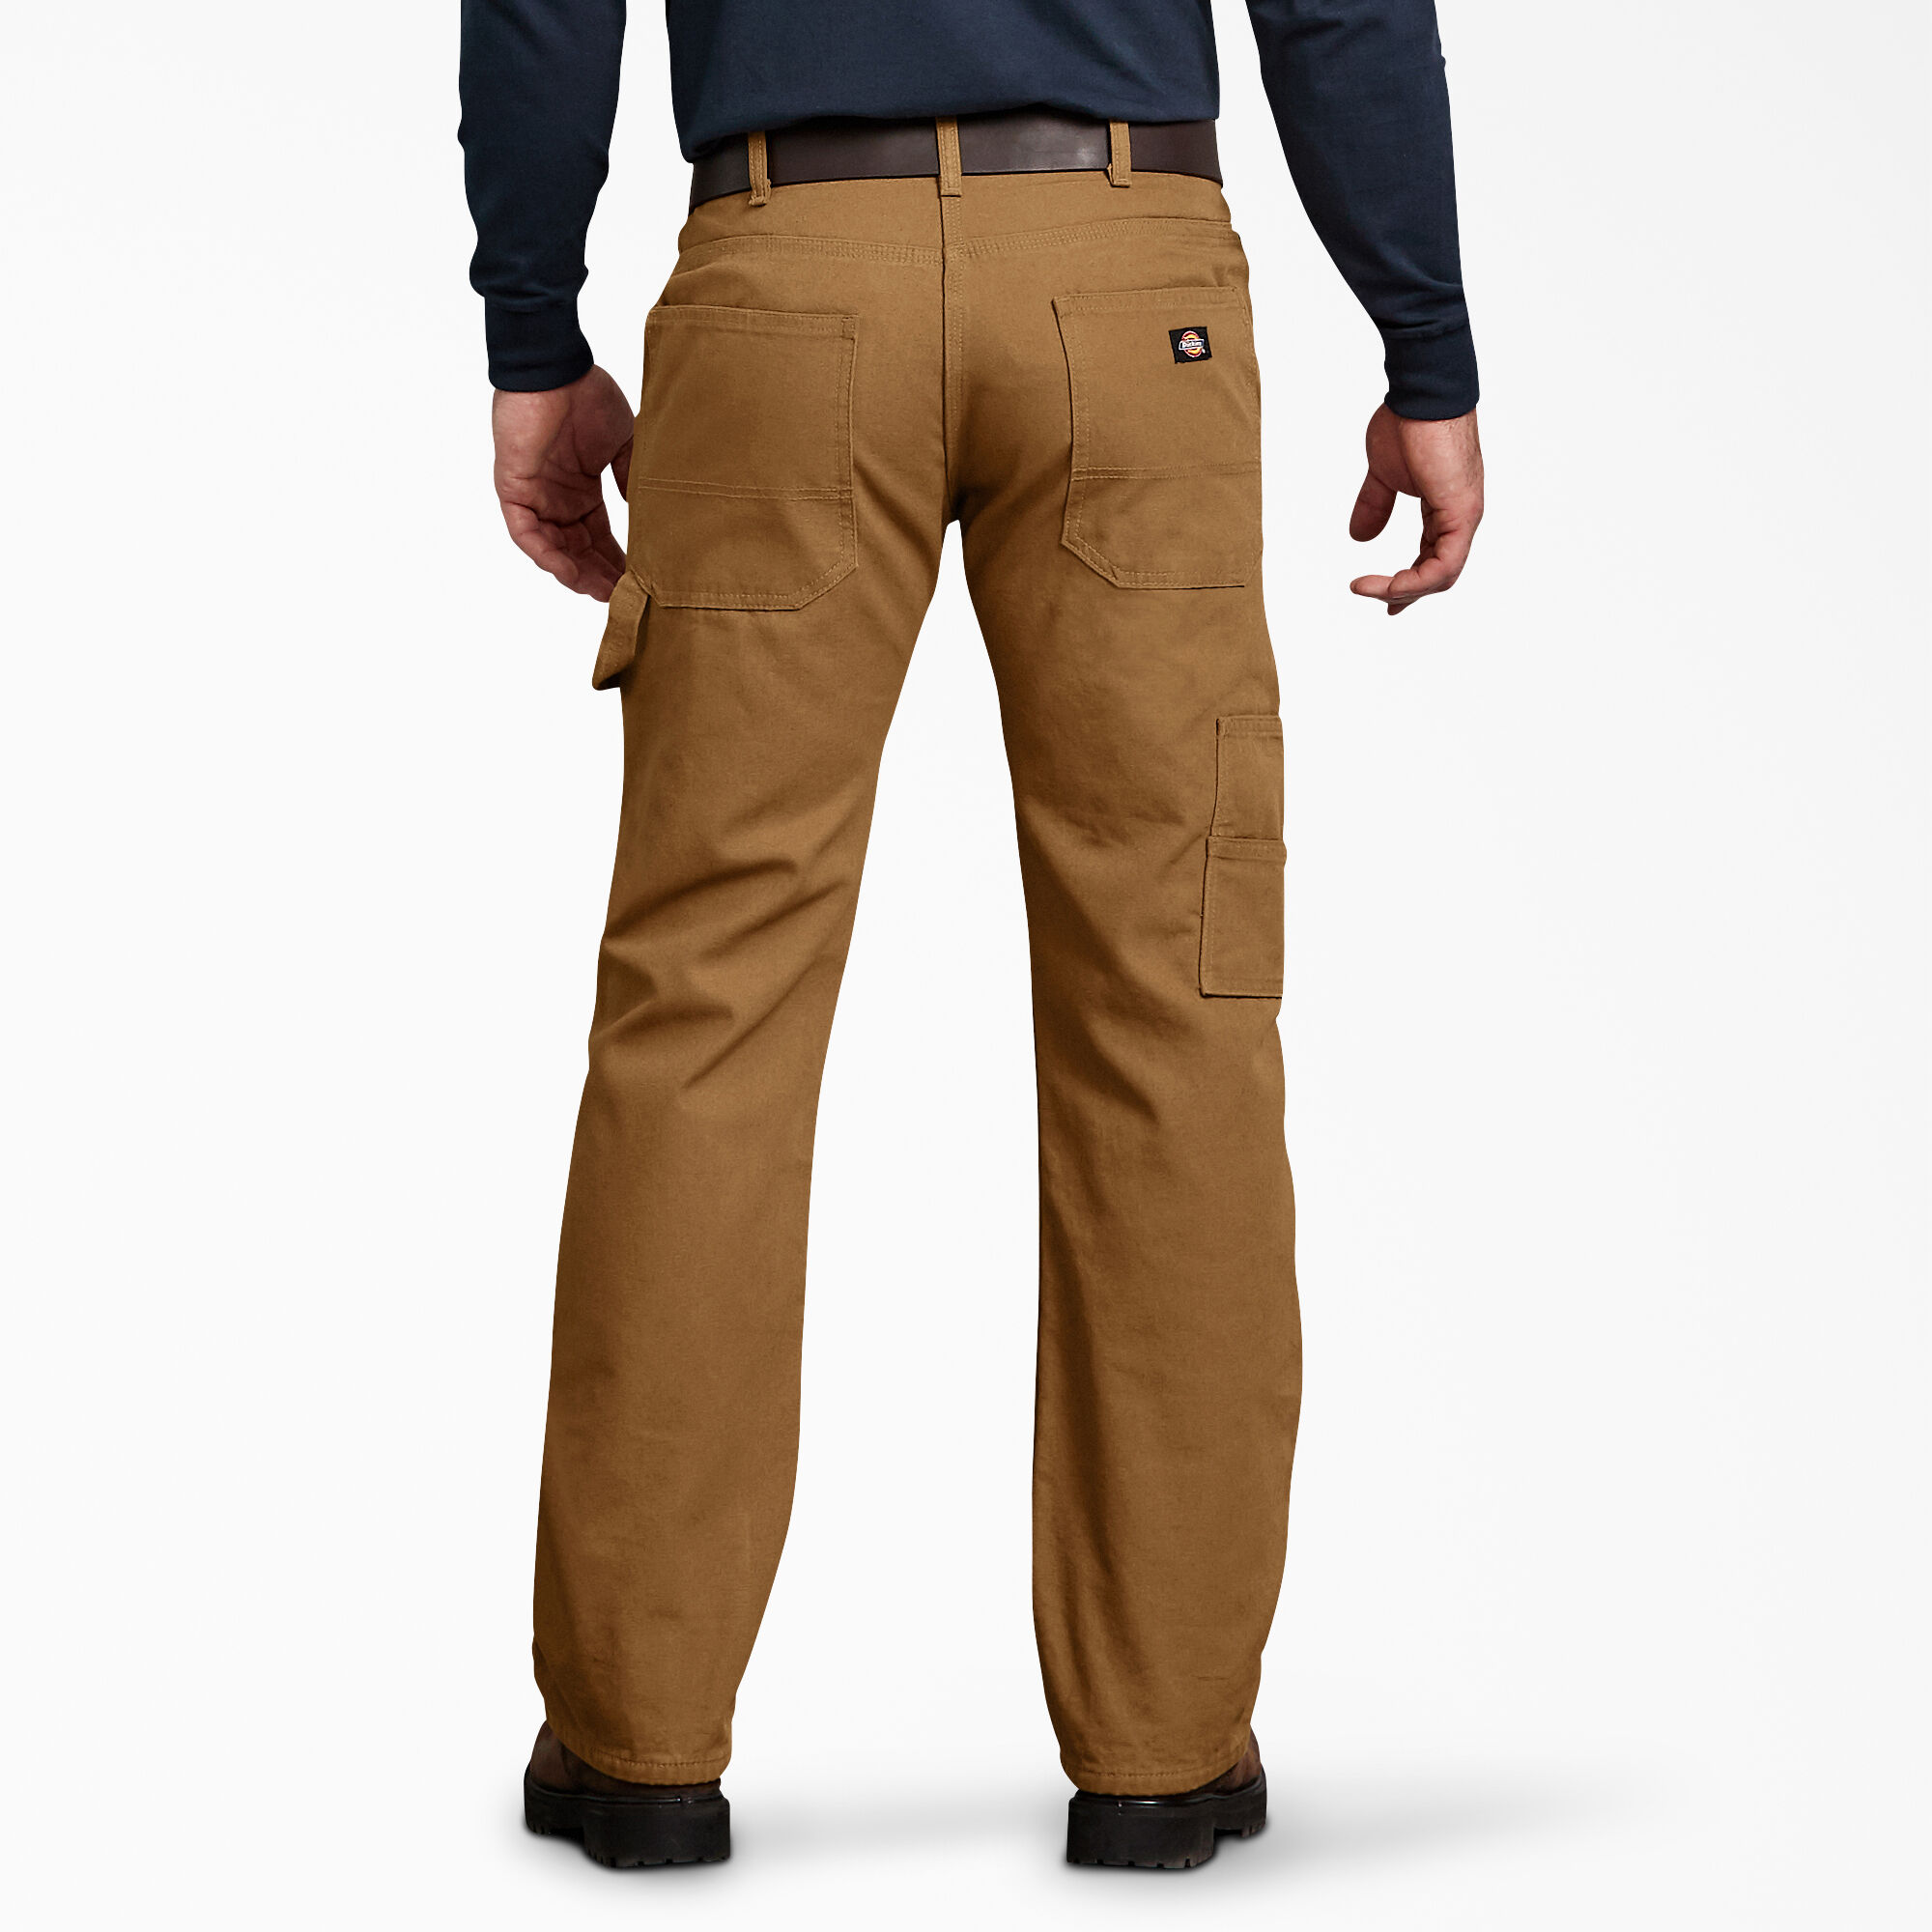 dickies flannel lined carpenter pants